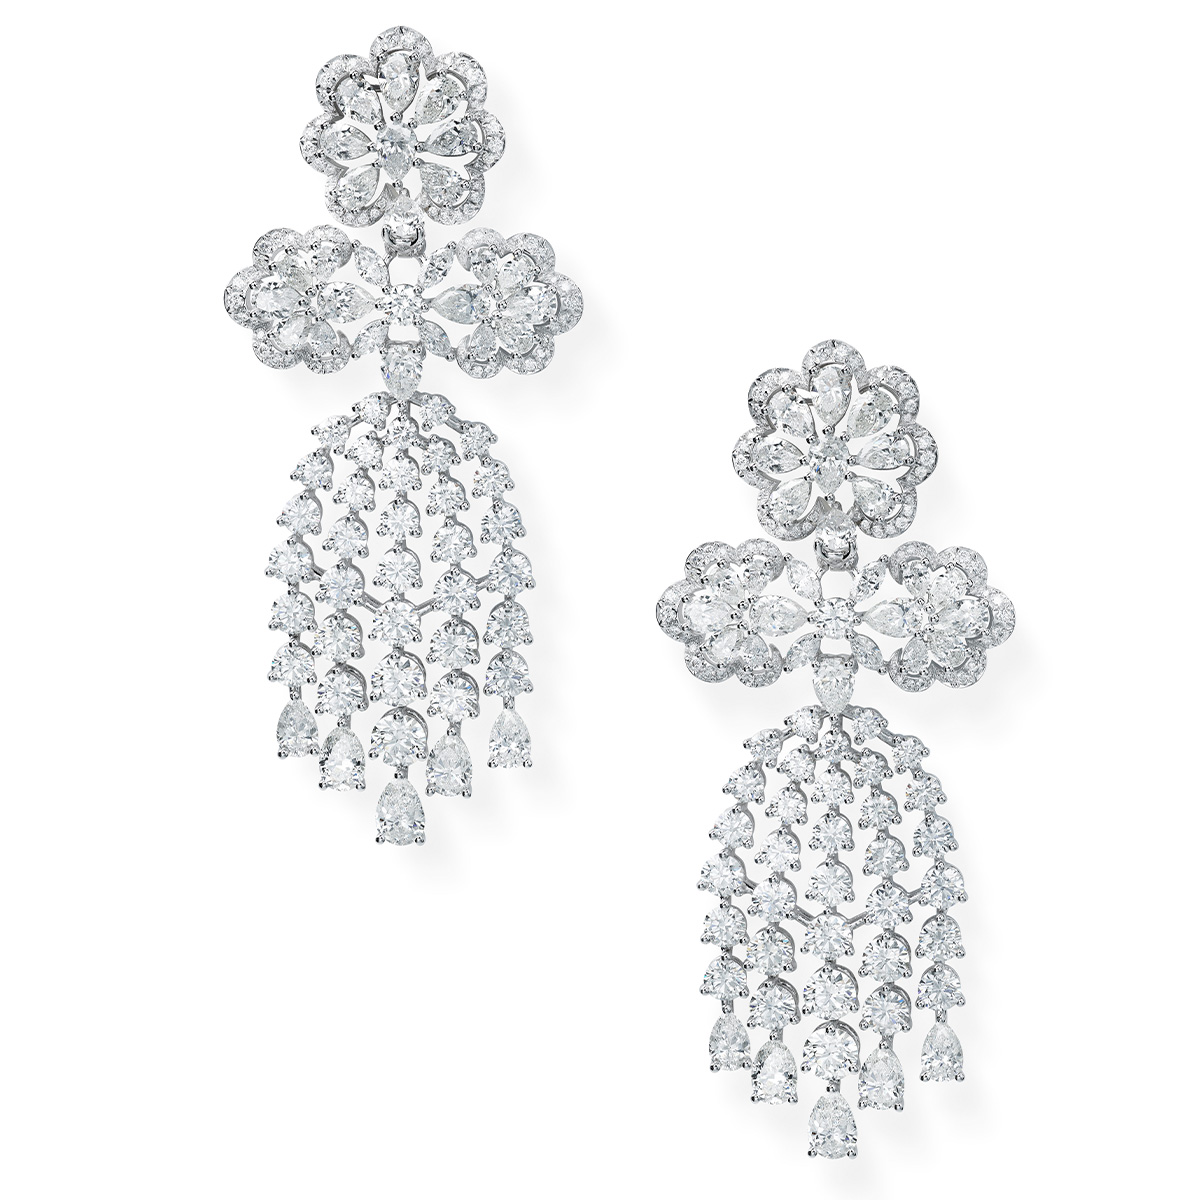 Chopard Jewels to Dazzle on Cannes Red Carpet